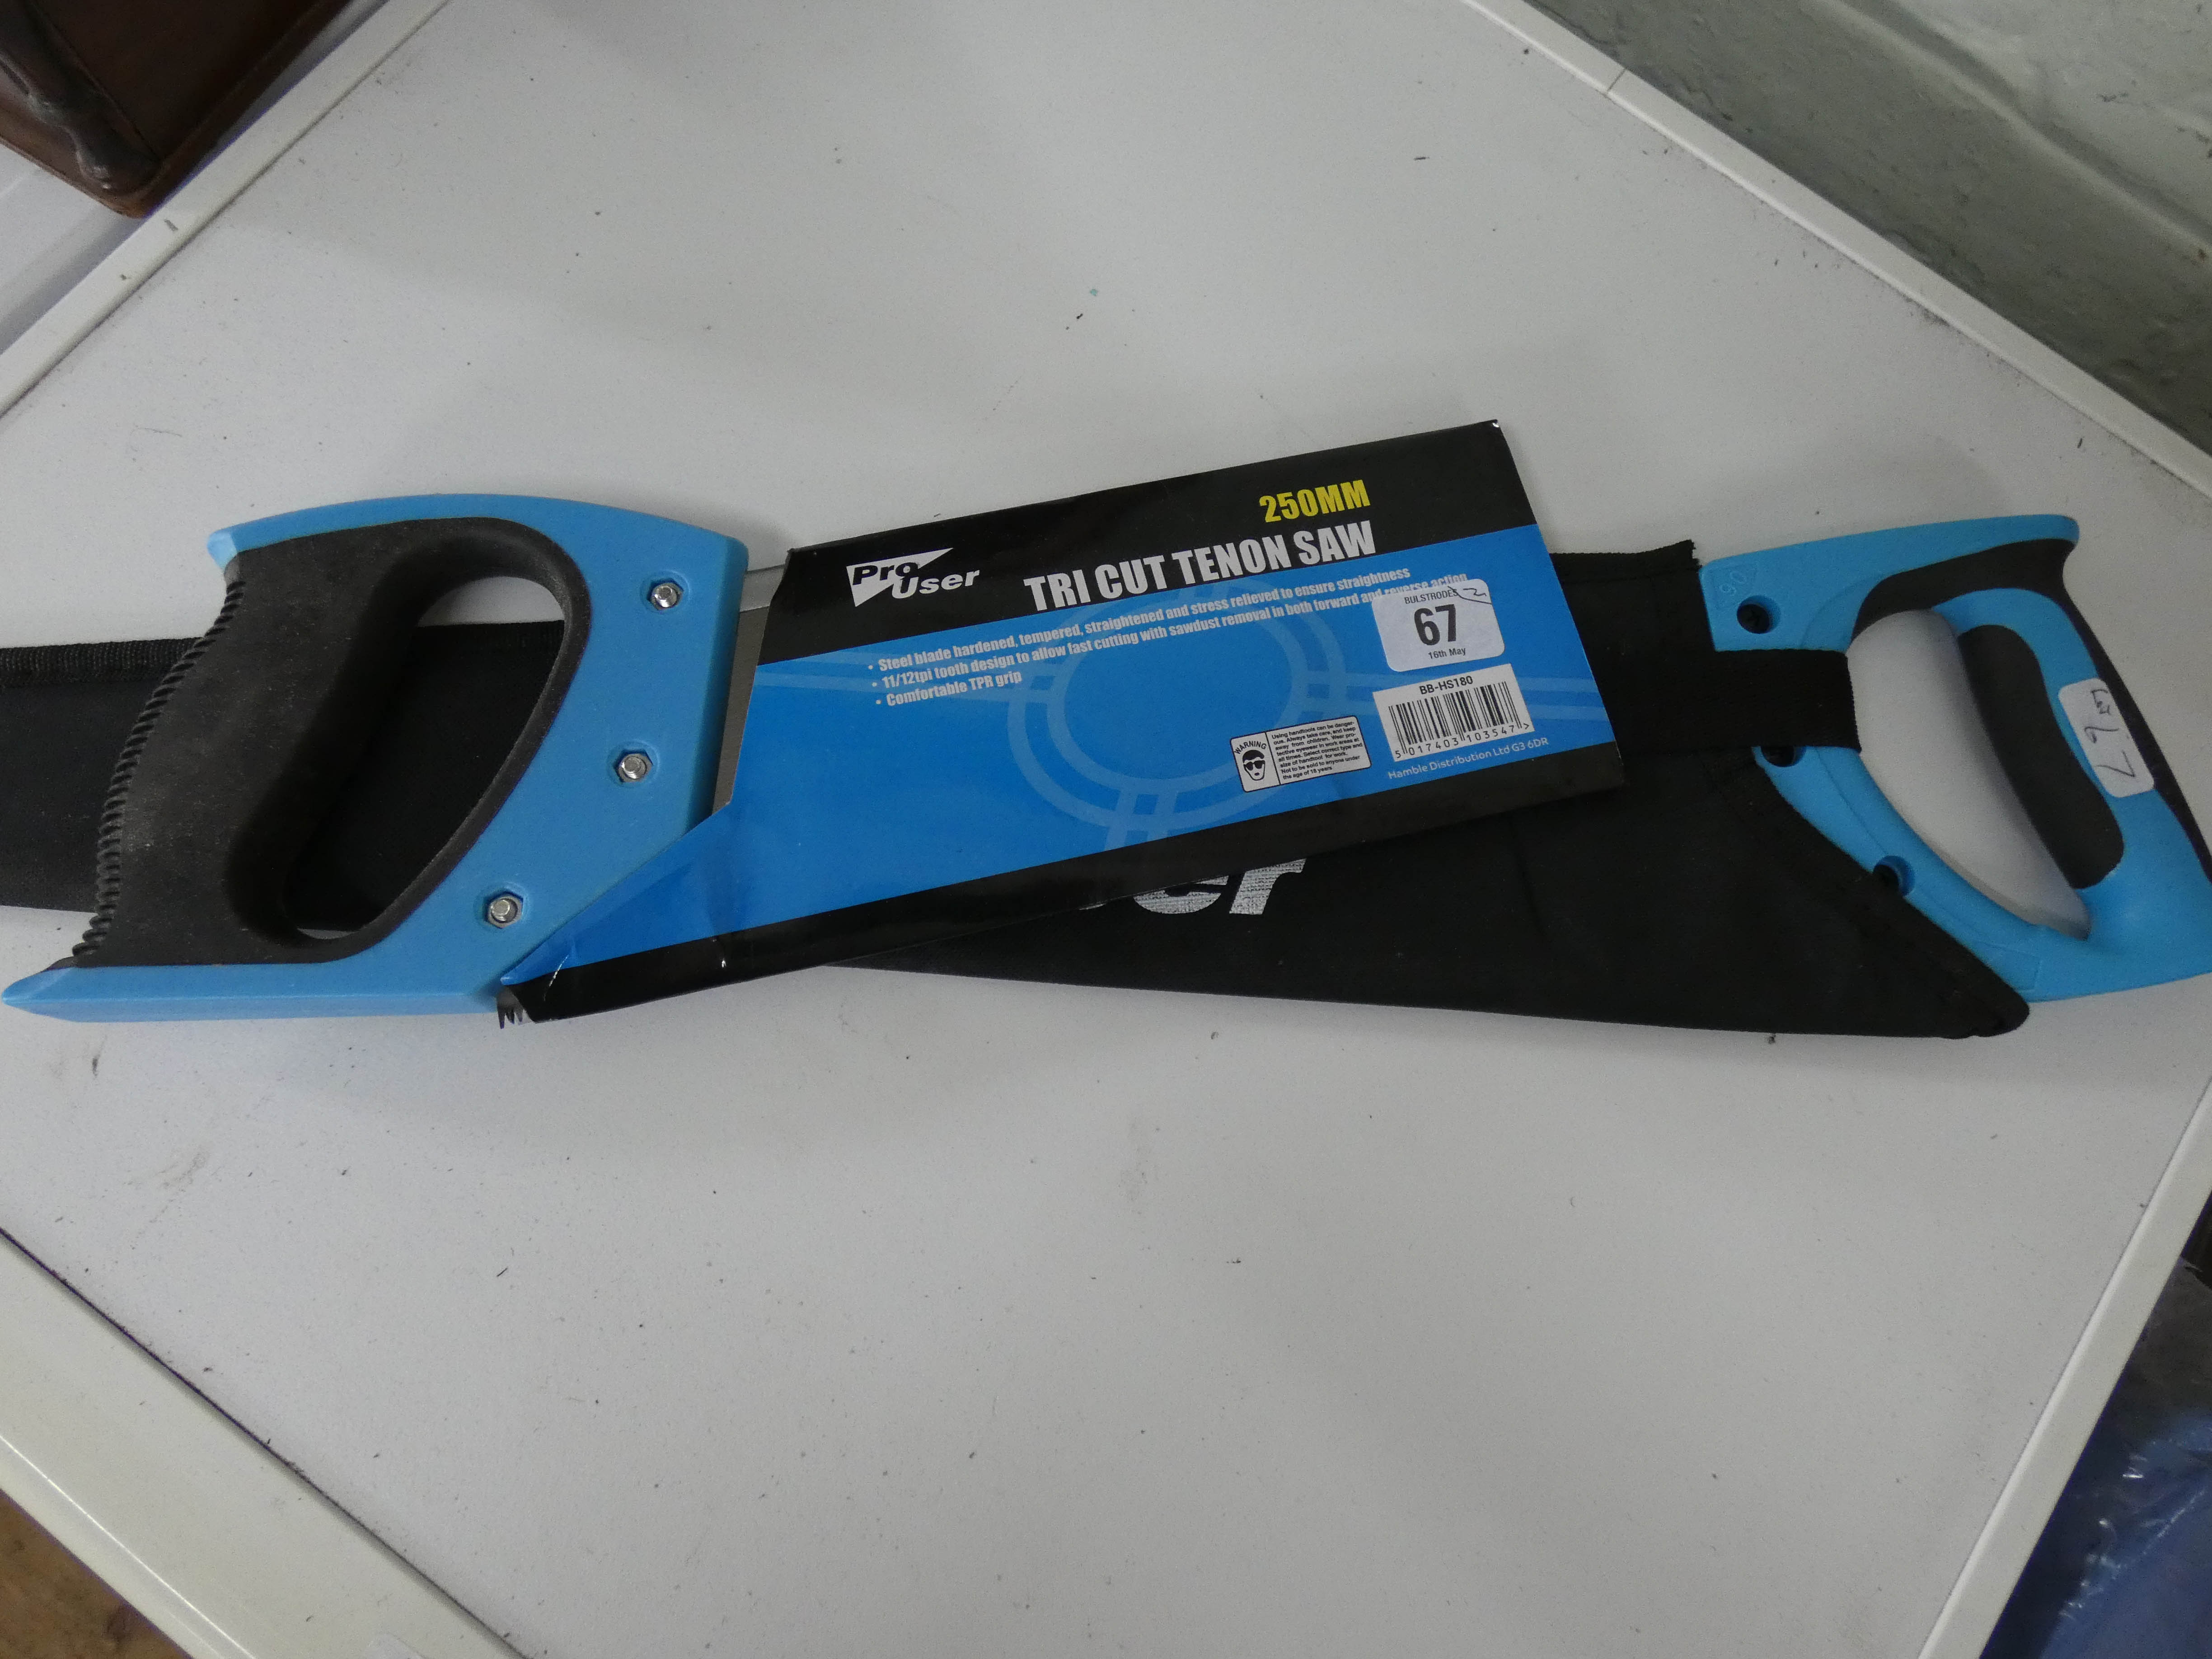 A new Stay Sharpe handsaw and a new tricut tenon saw